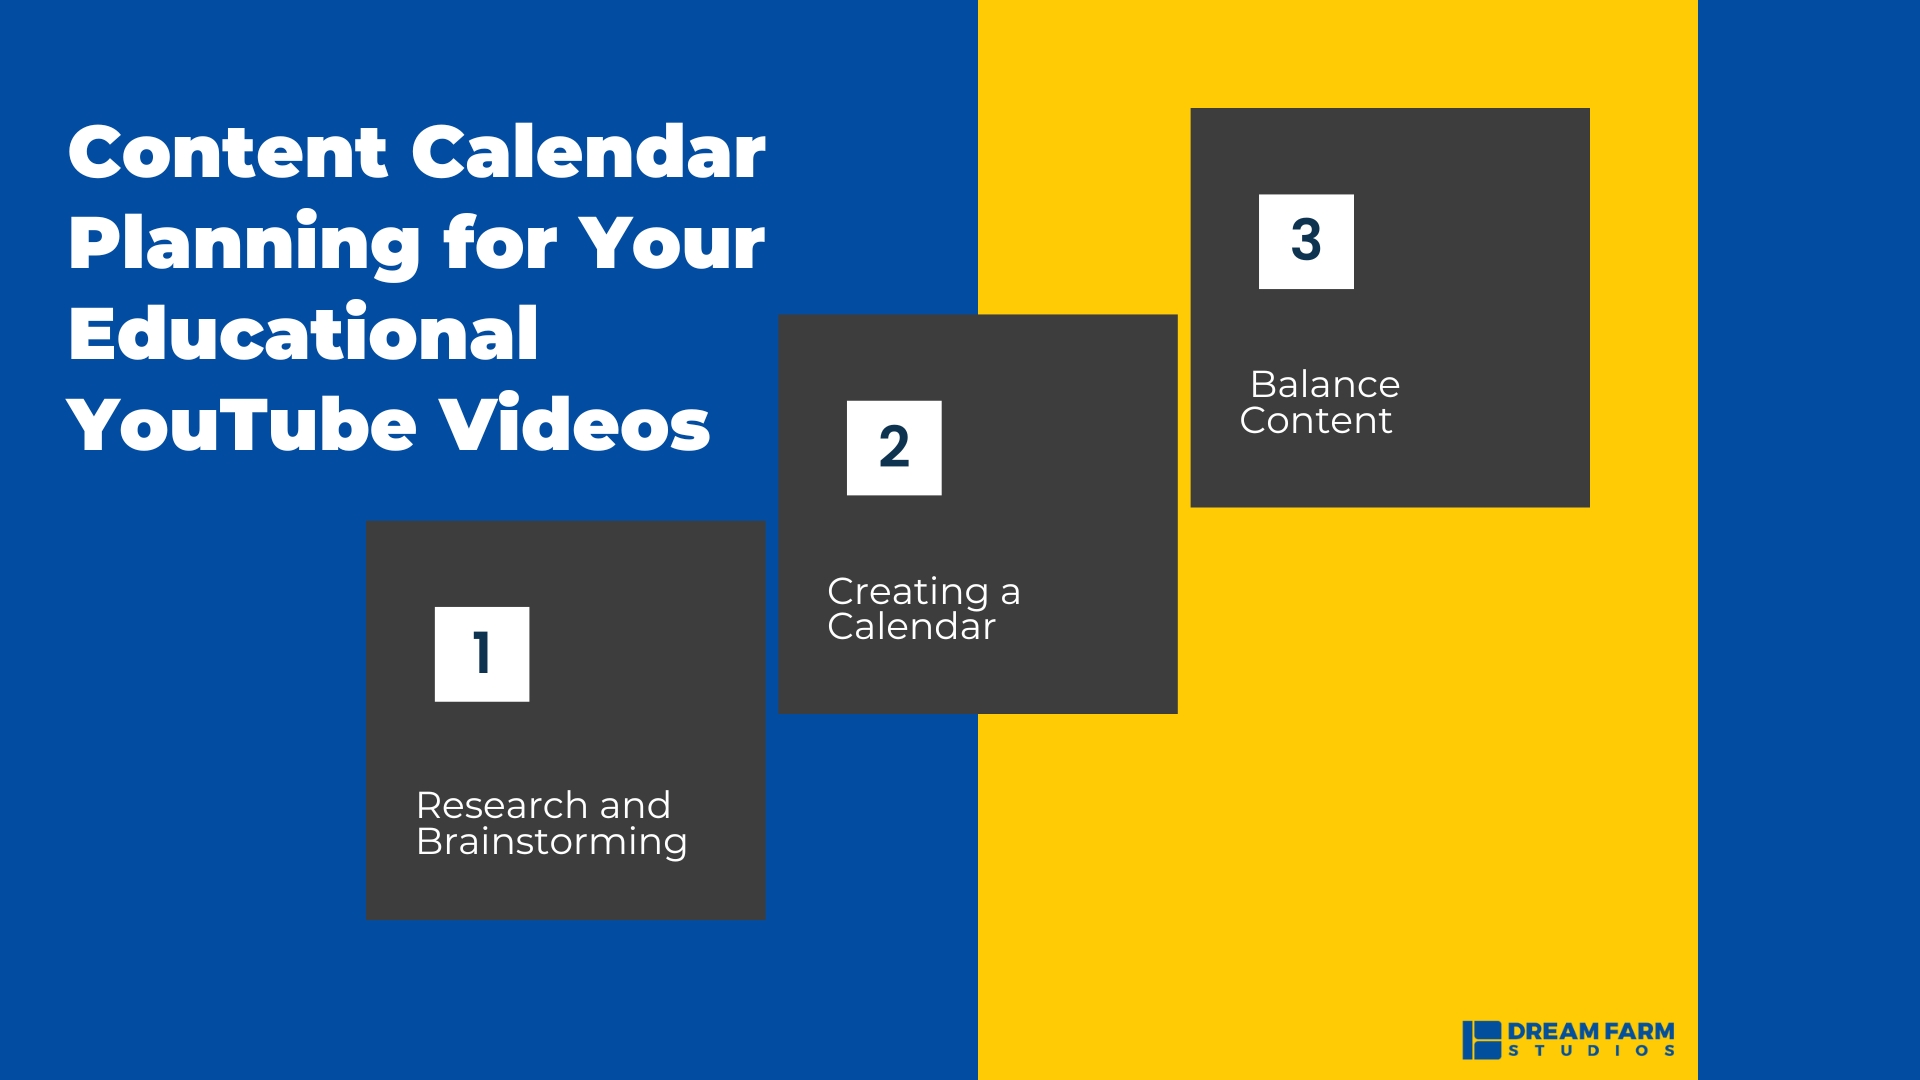 Content Calendar Planning for Your Educational YouTube Videos